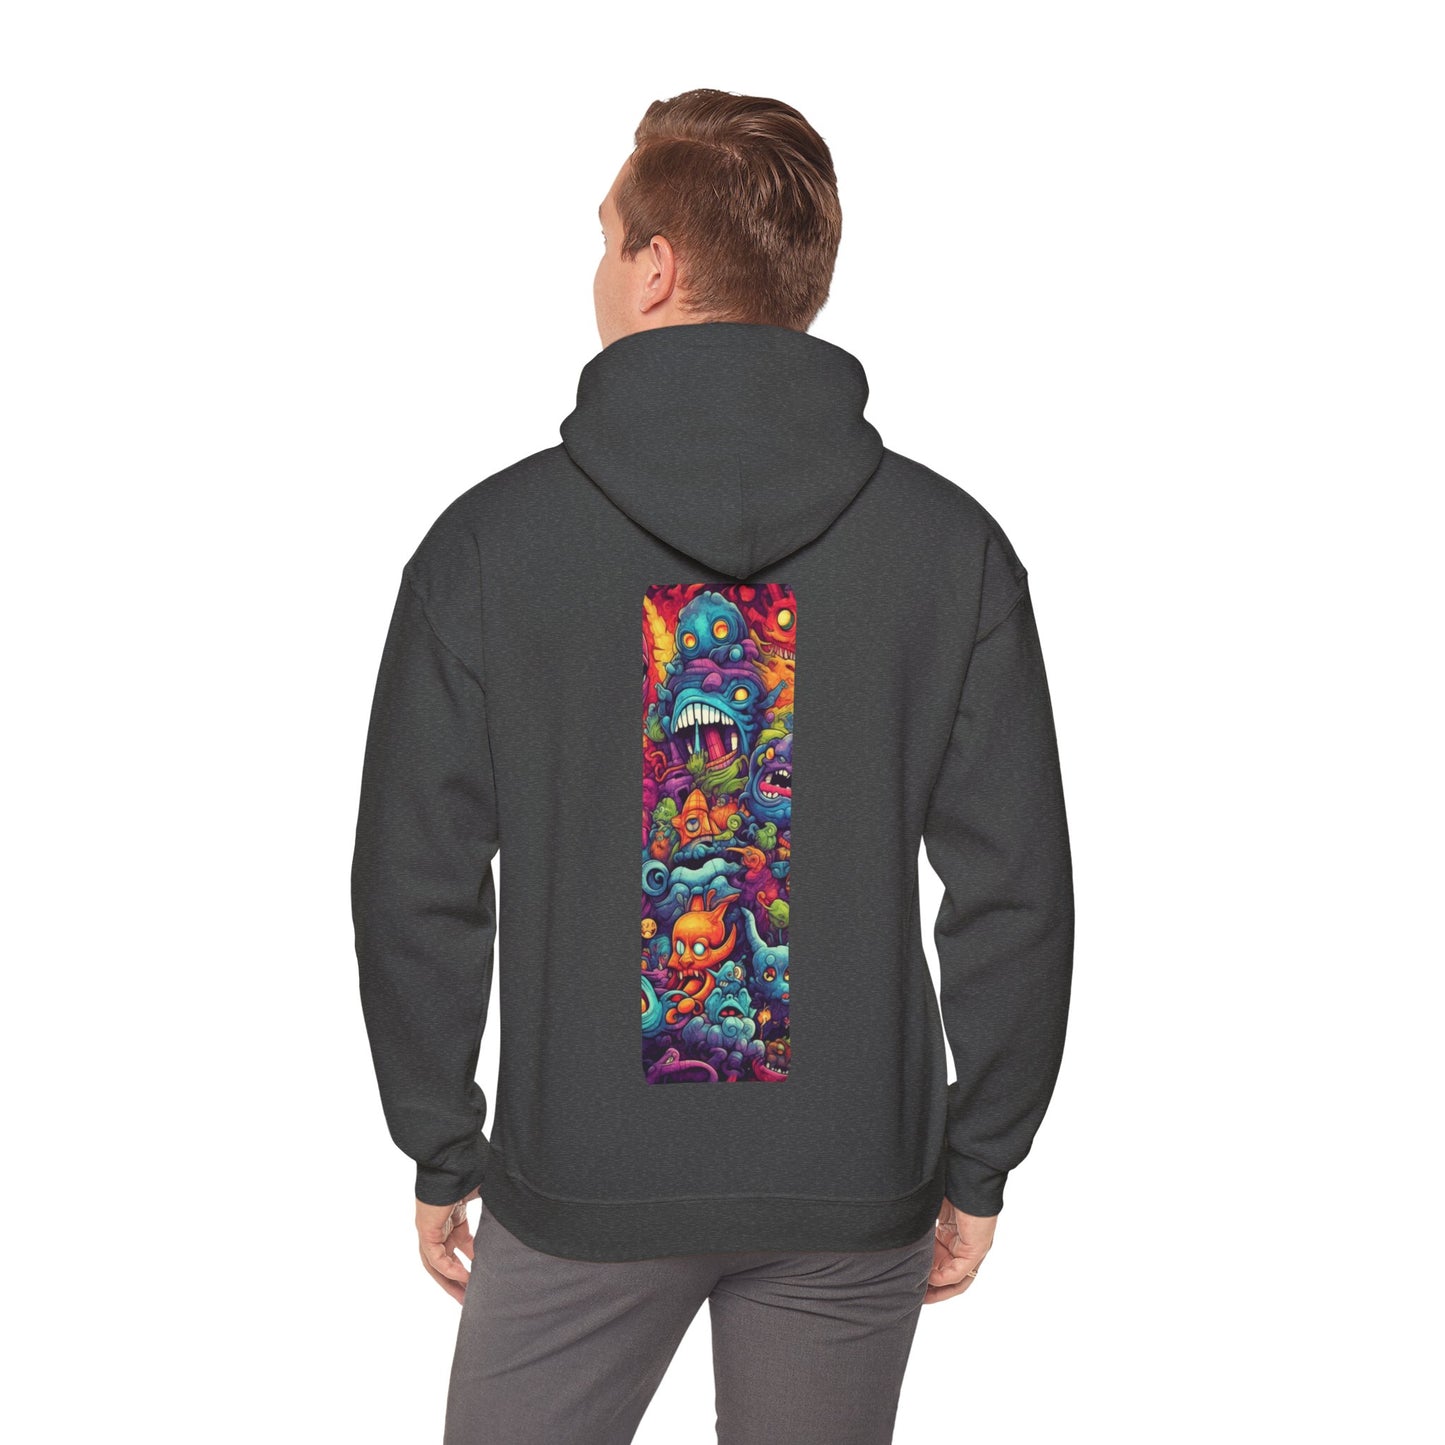 Artist Hoodie Featuring Whimsical Monster